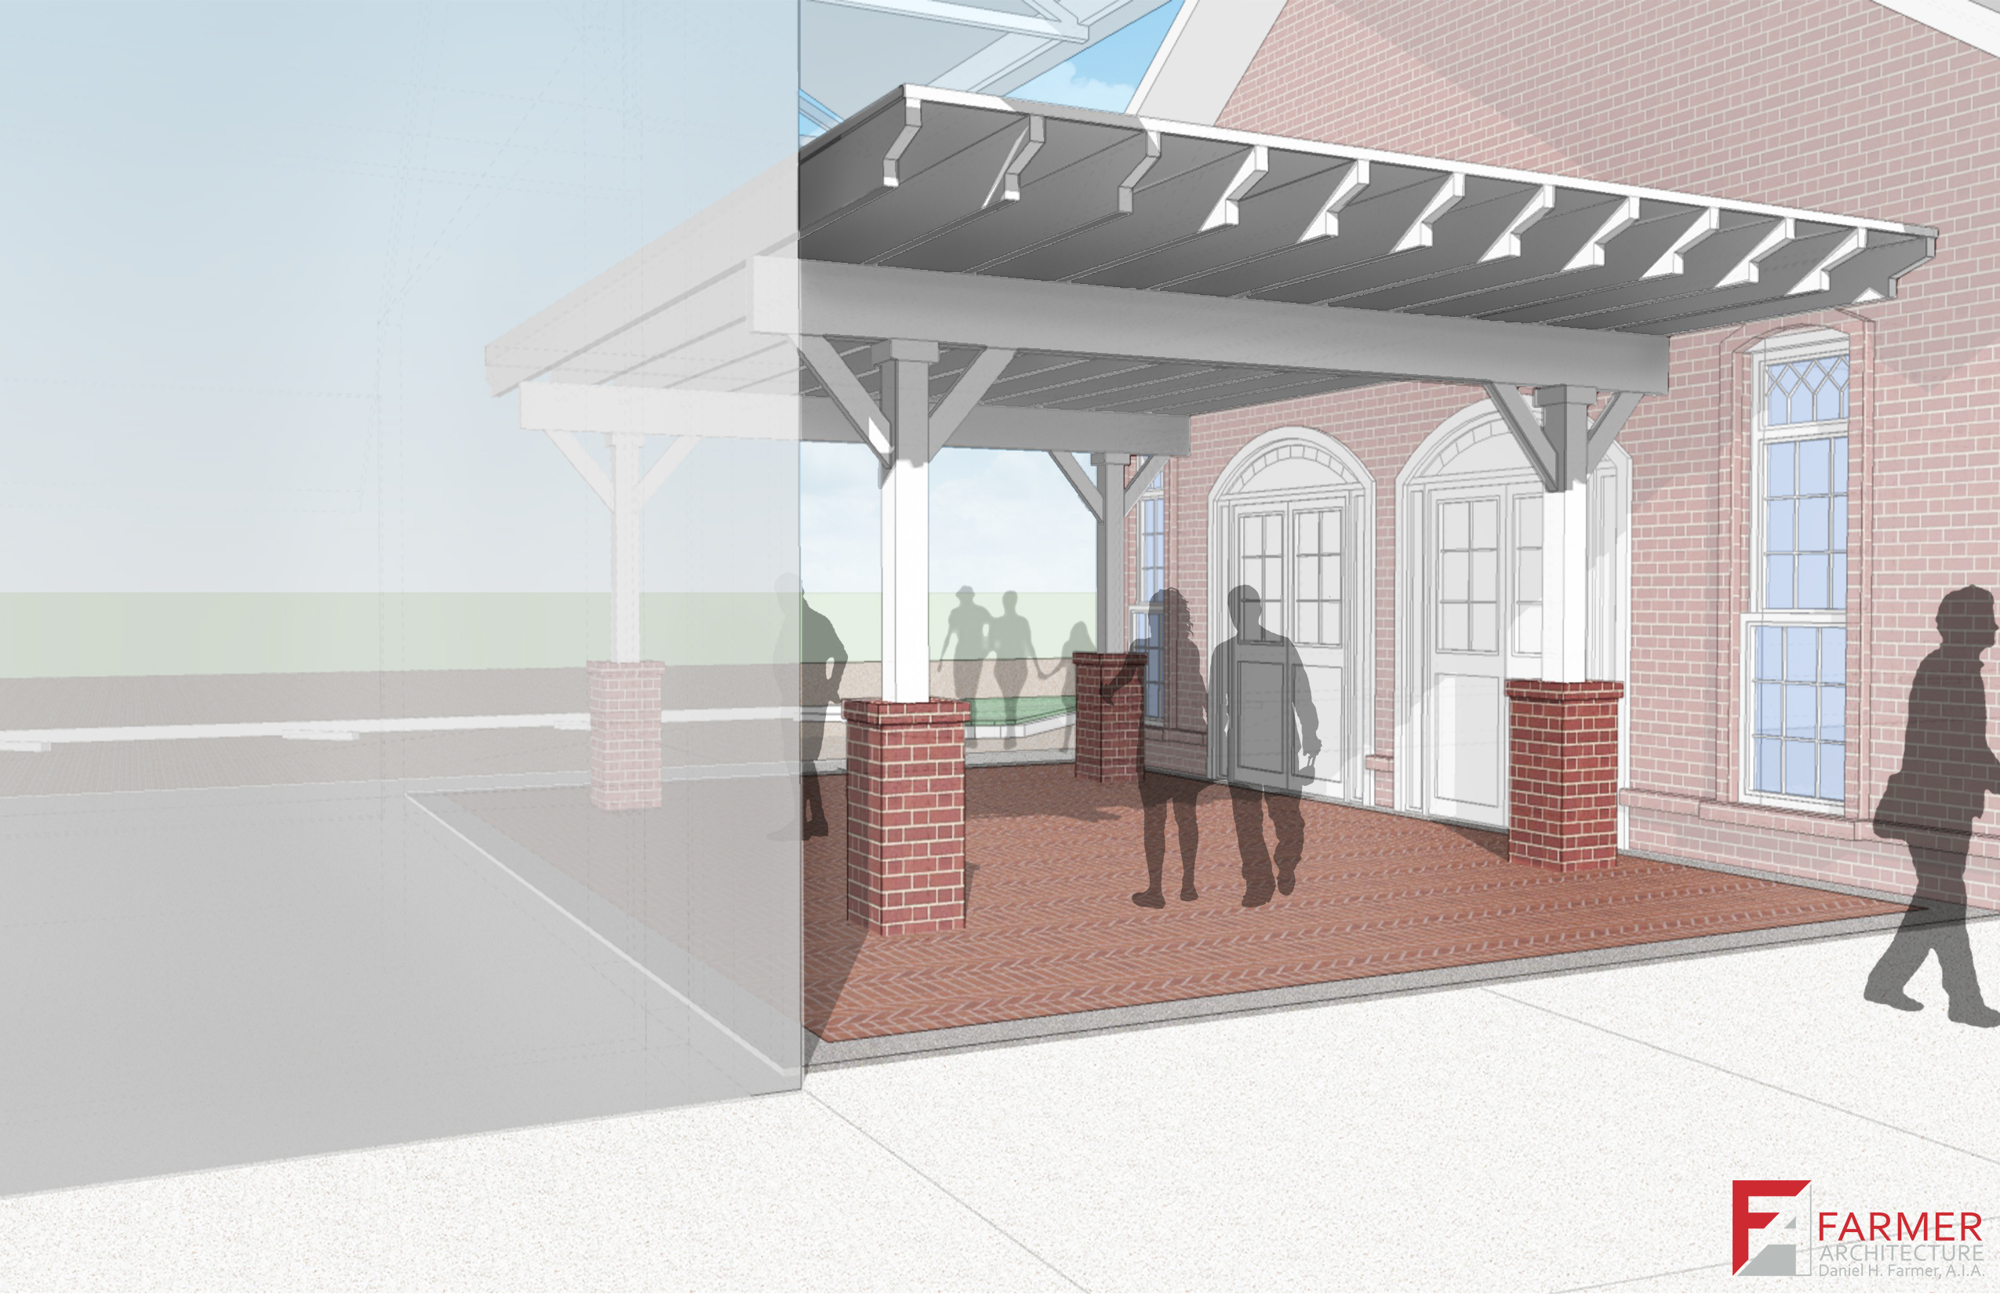 The Winter Garden Heritage Foundation is creating a covered courtyard area between the museum and research center to extend its rentals outside. The caboose is not included in the rendering but will remain in its current location.